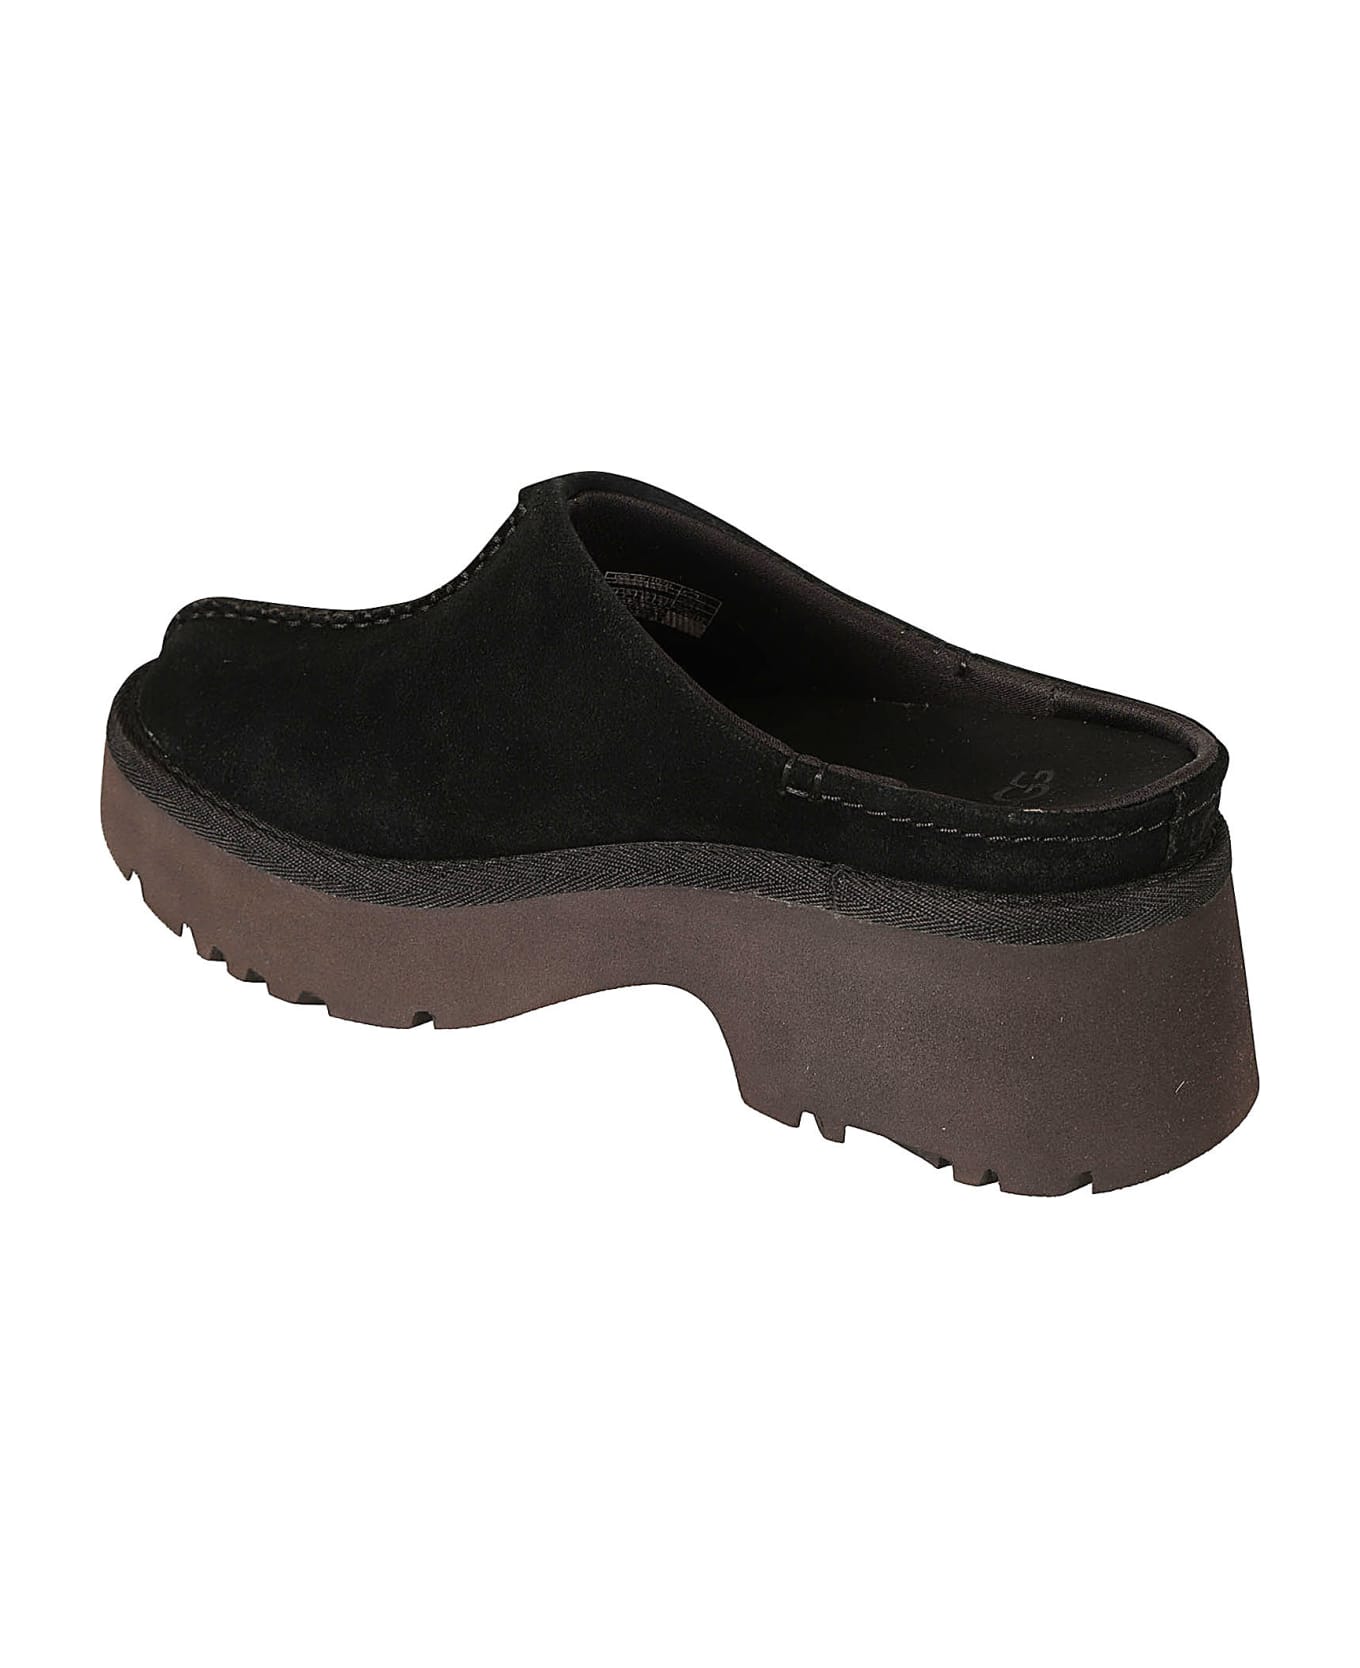 UGG New Heights Clogs - Black